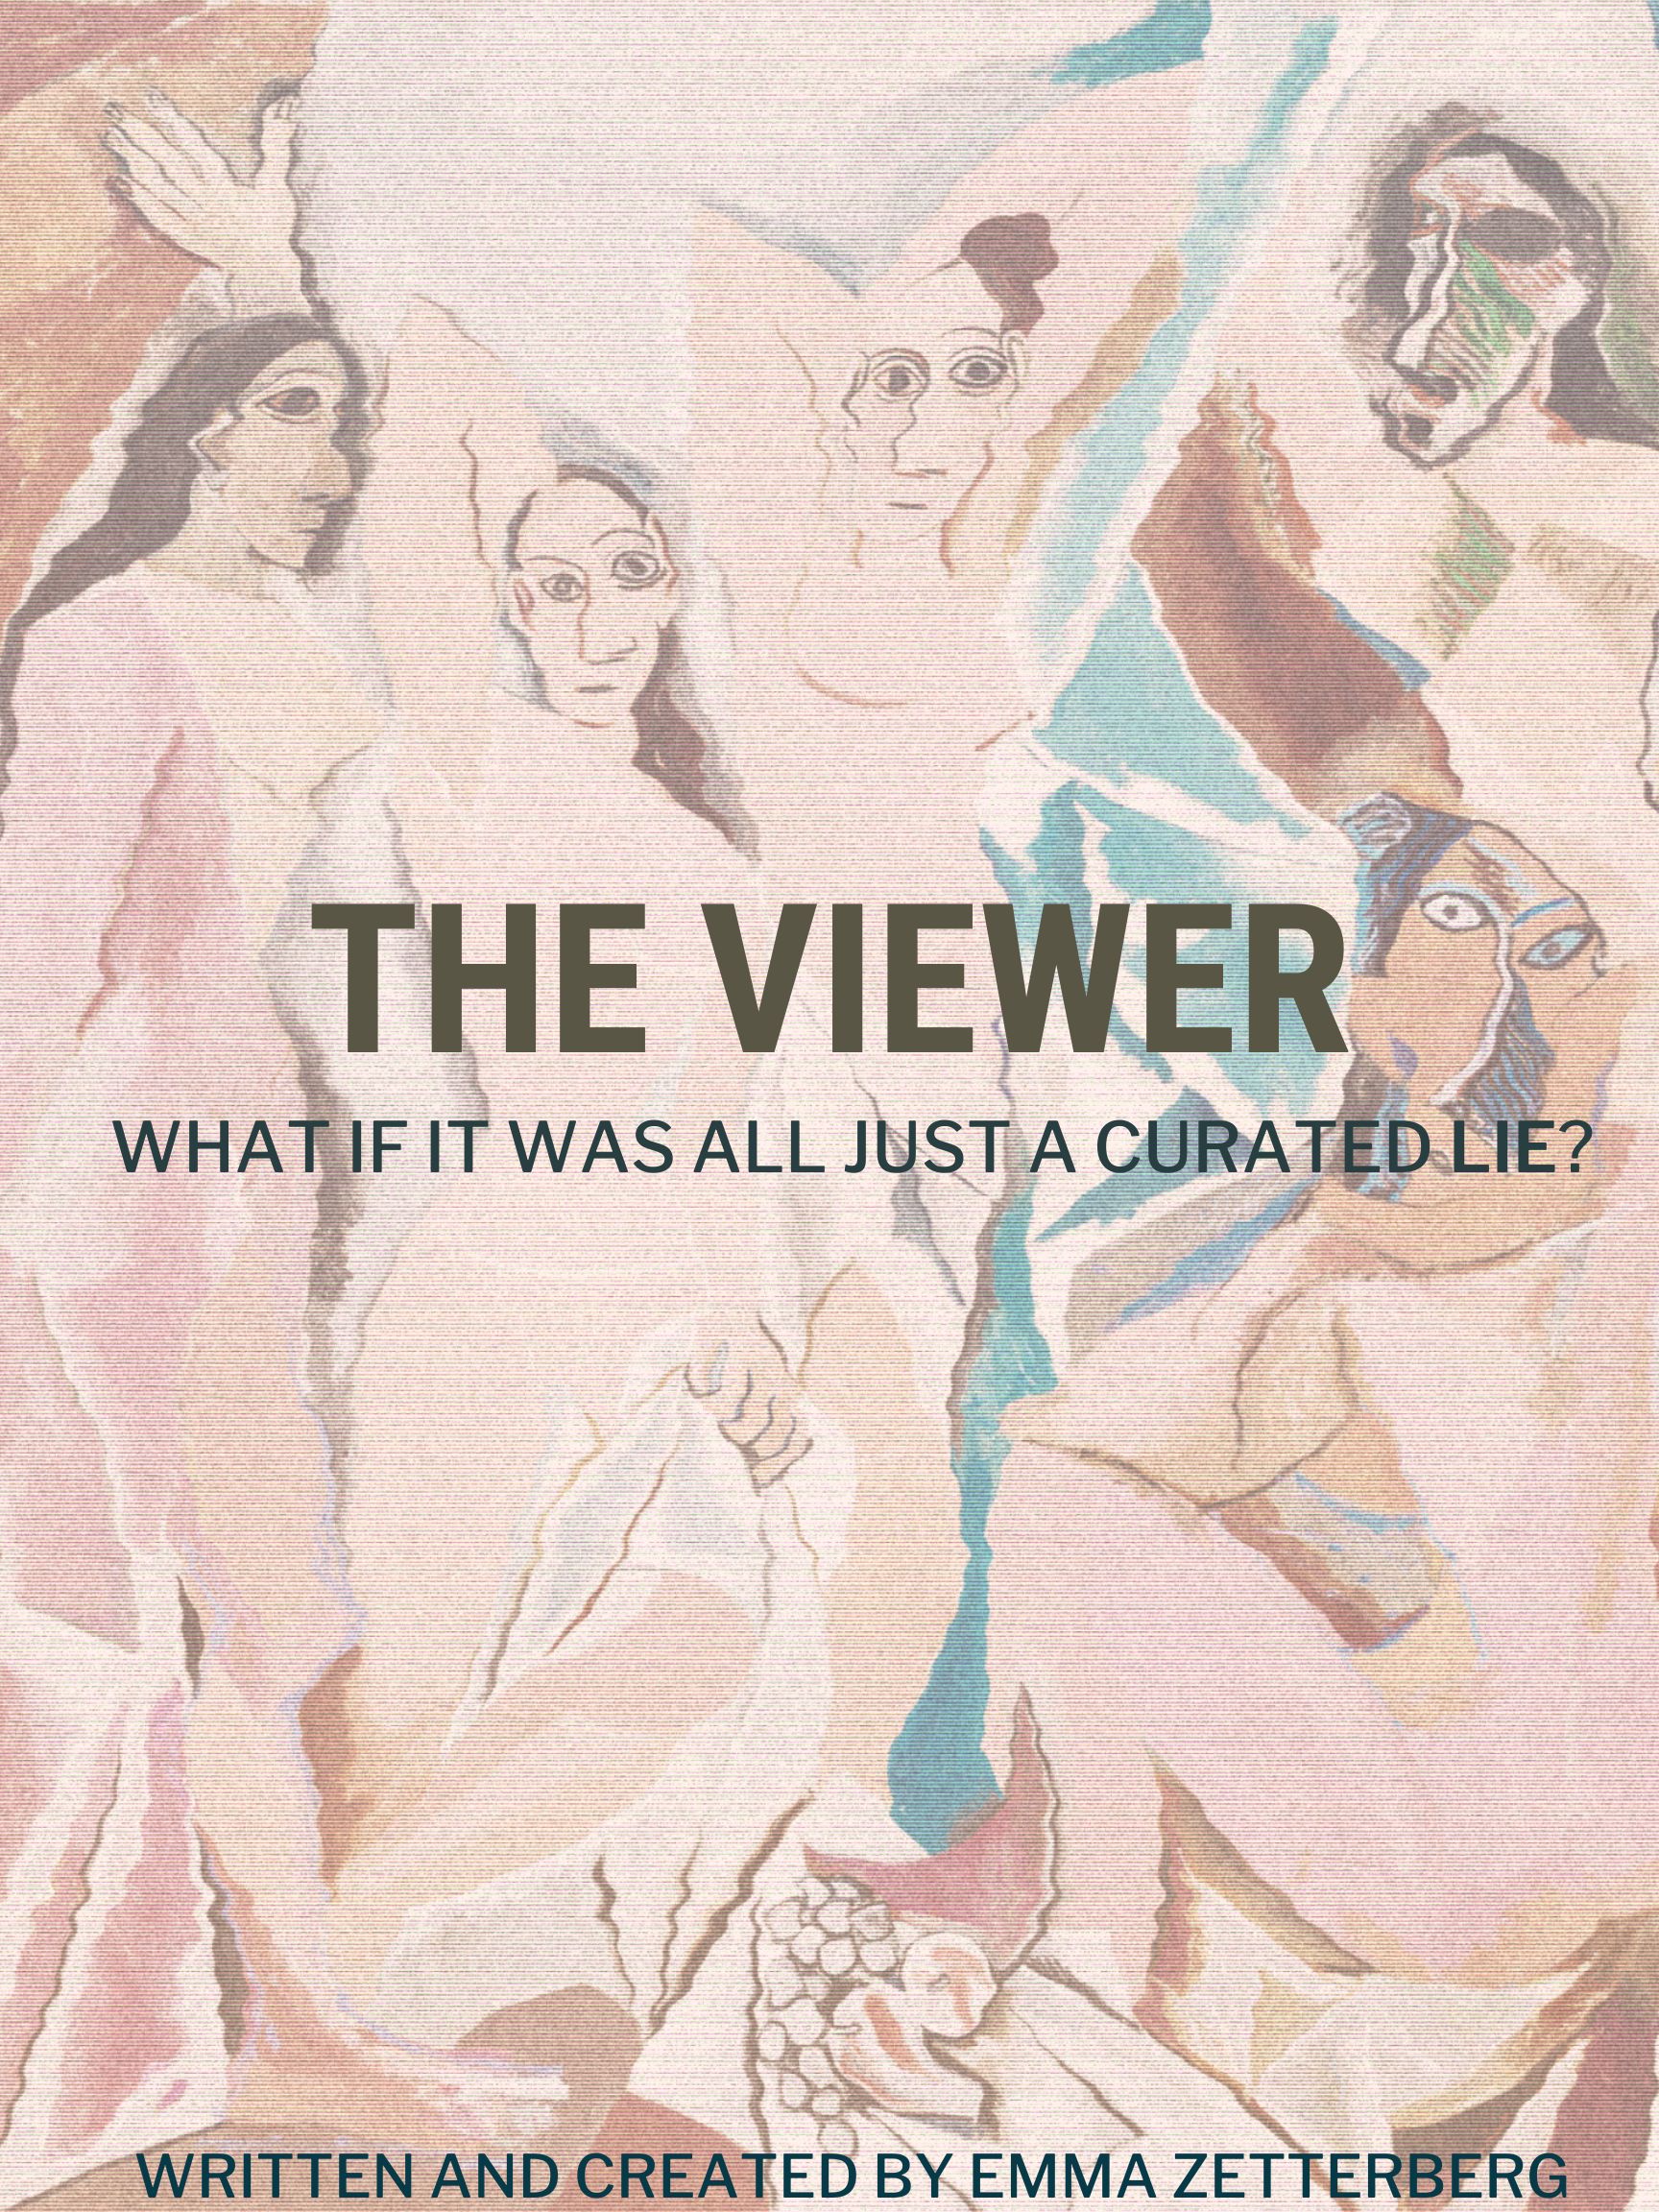 Poster for "The Viewer"